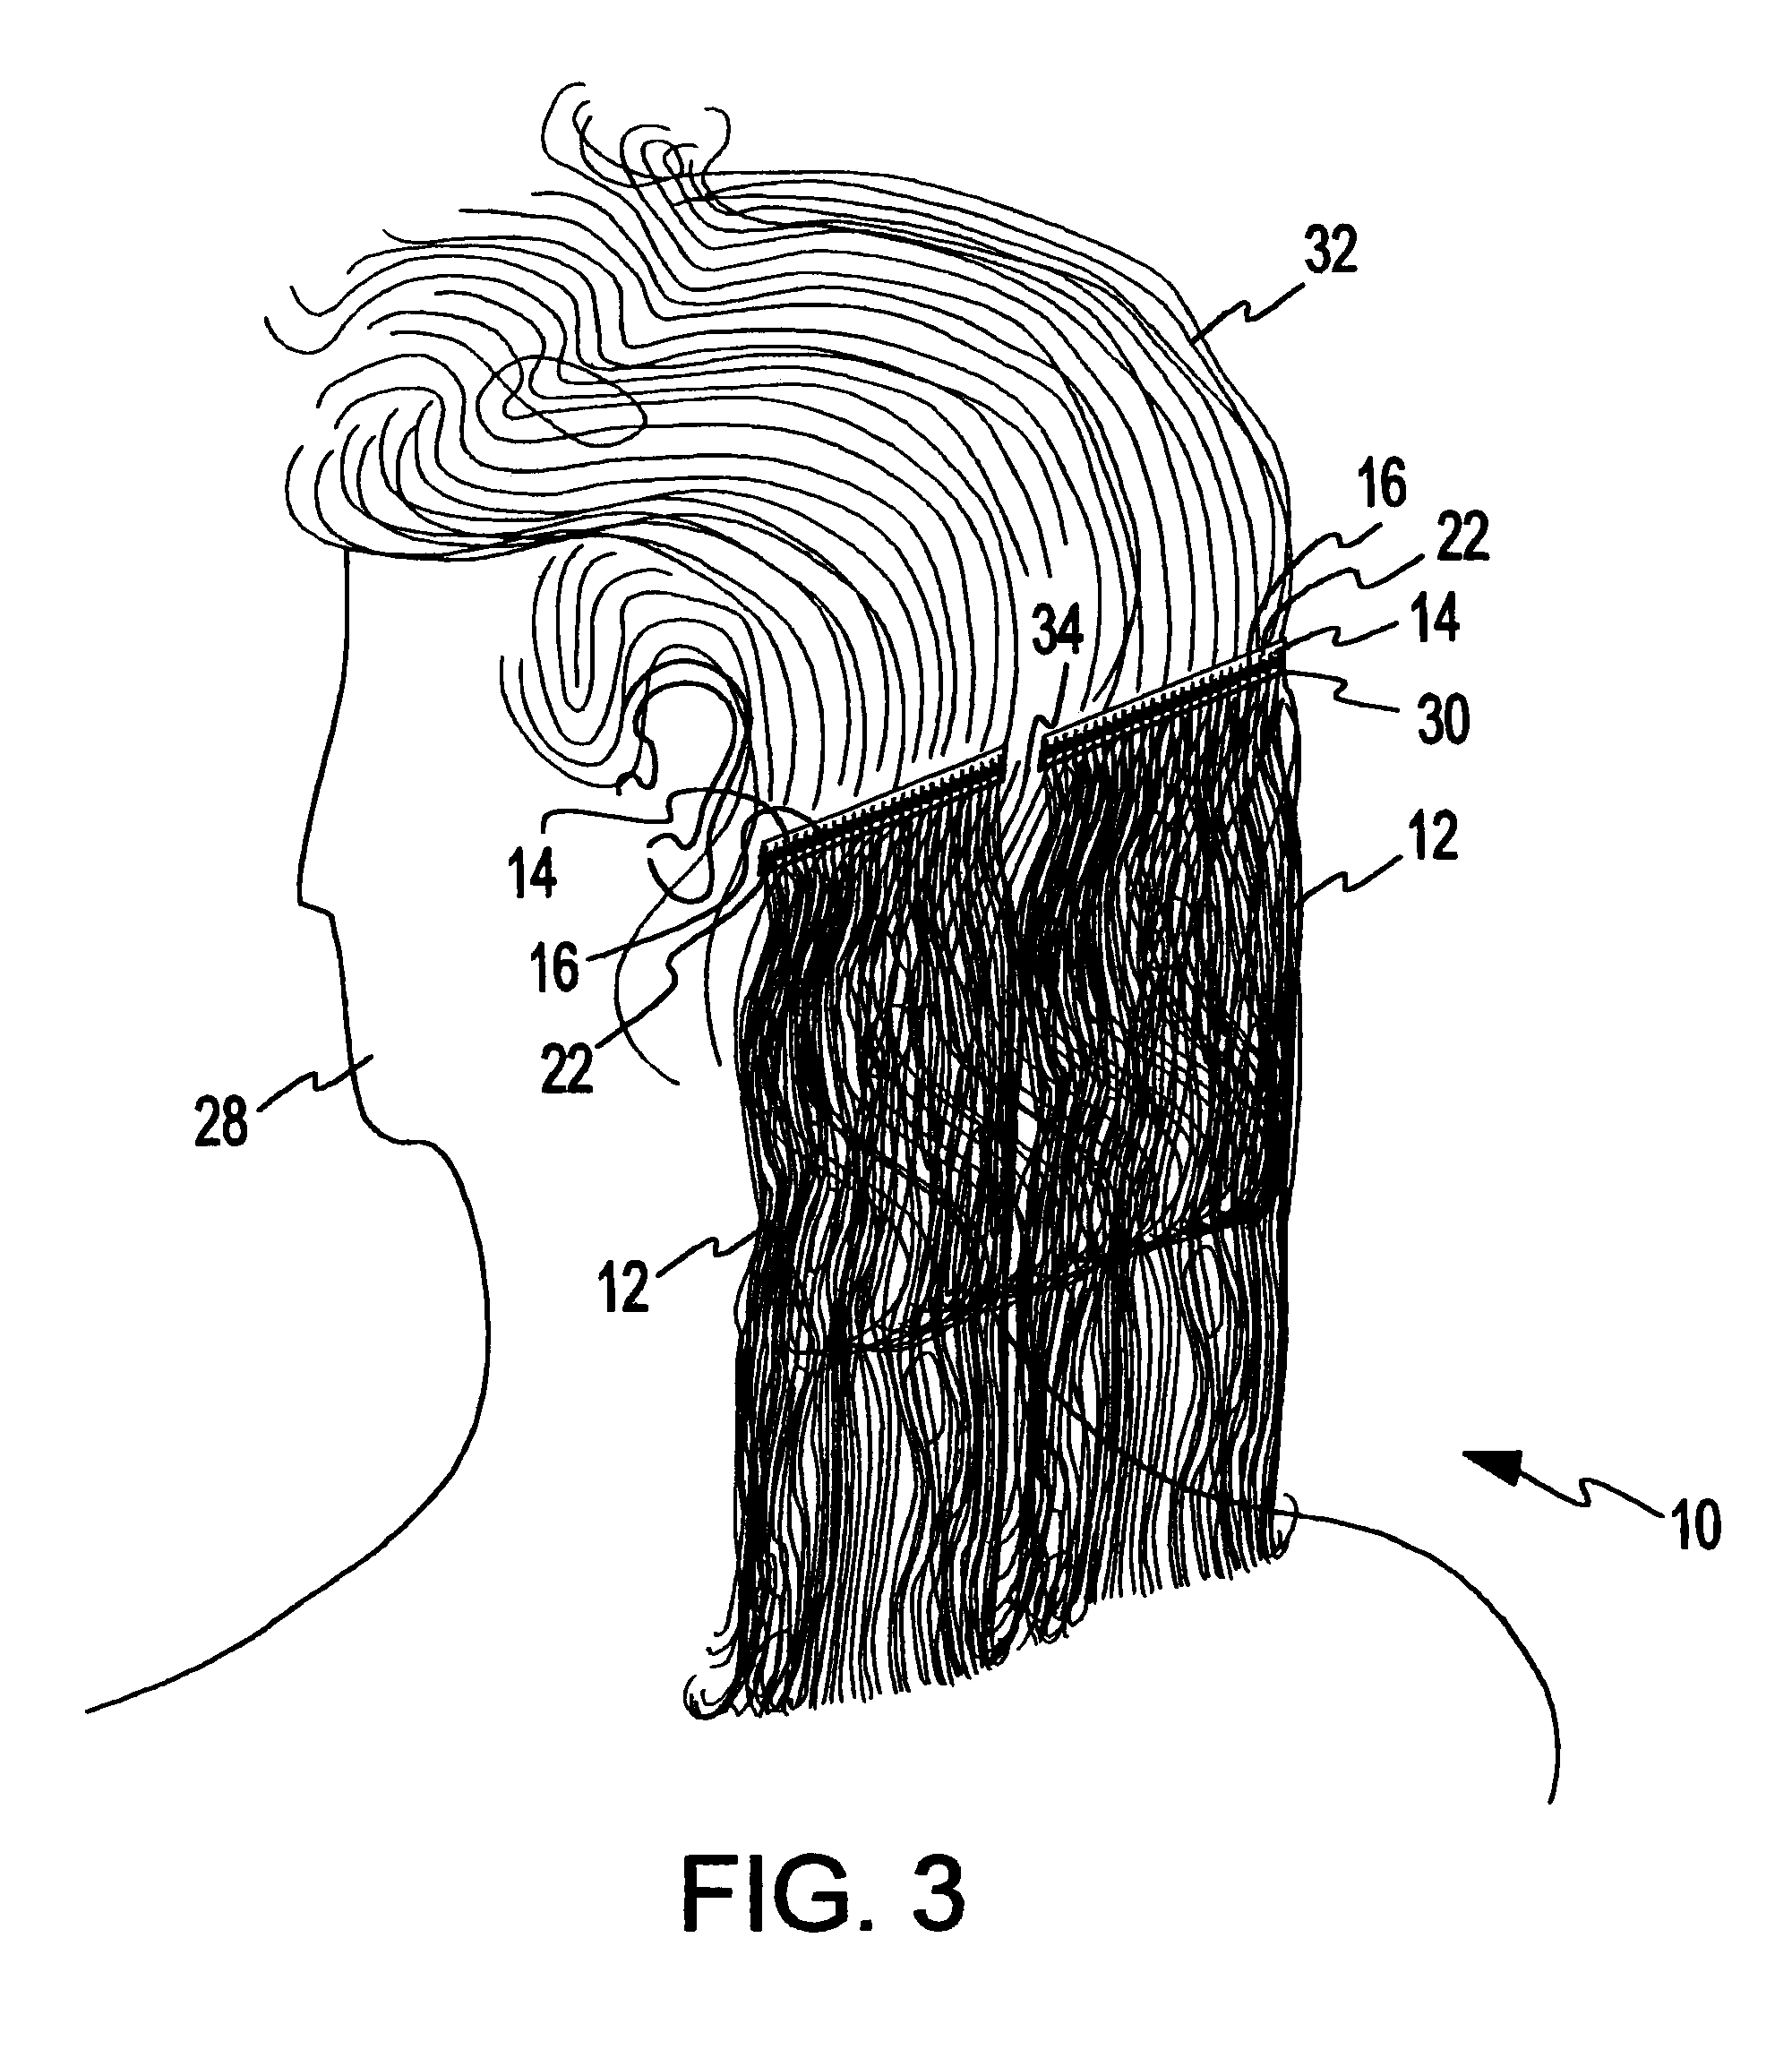 Method of using a self adhesive hair extension